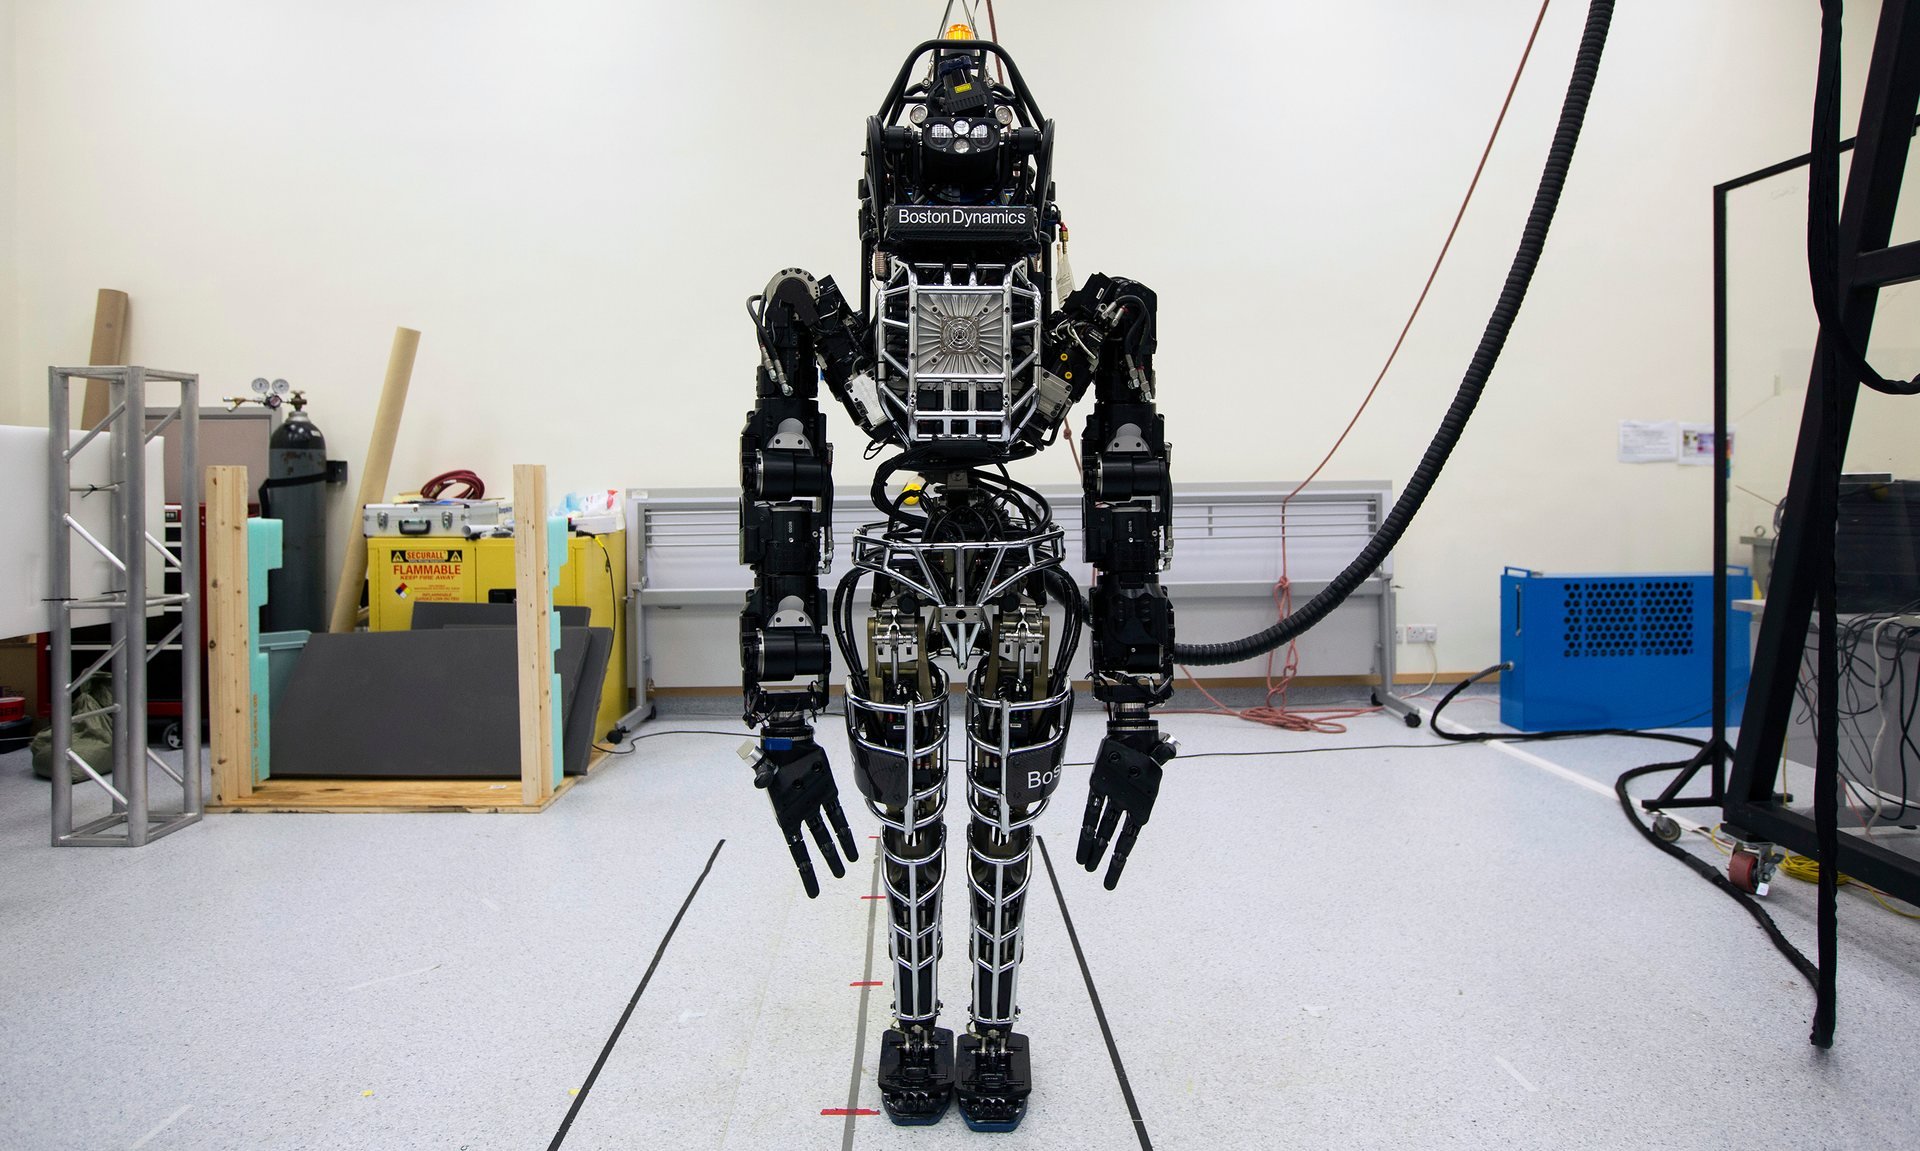 What's New In Robotics This Week - Sep 23